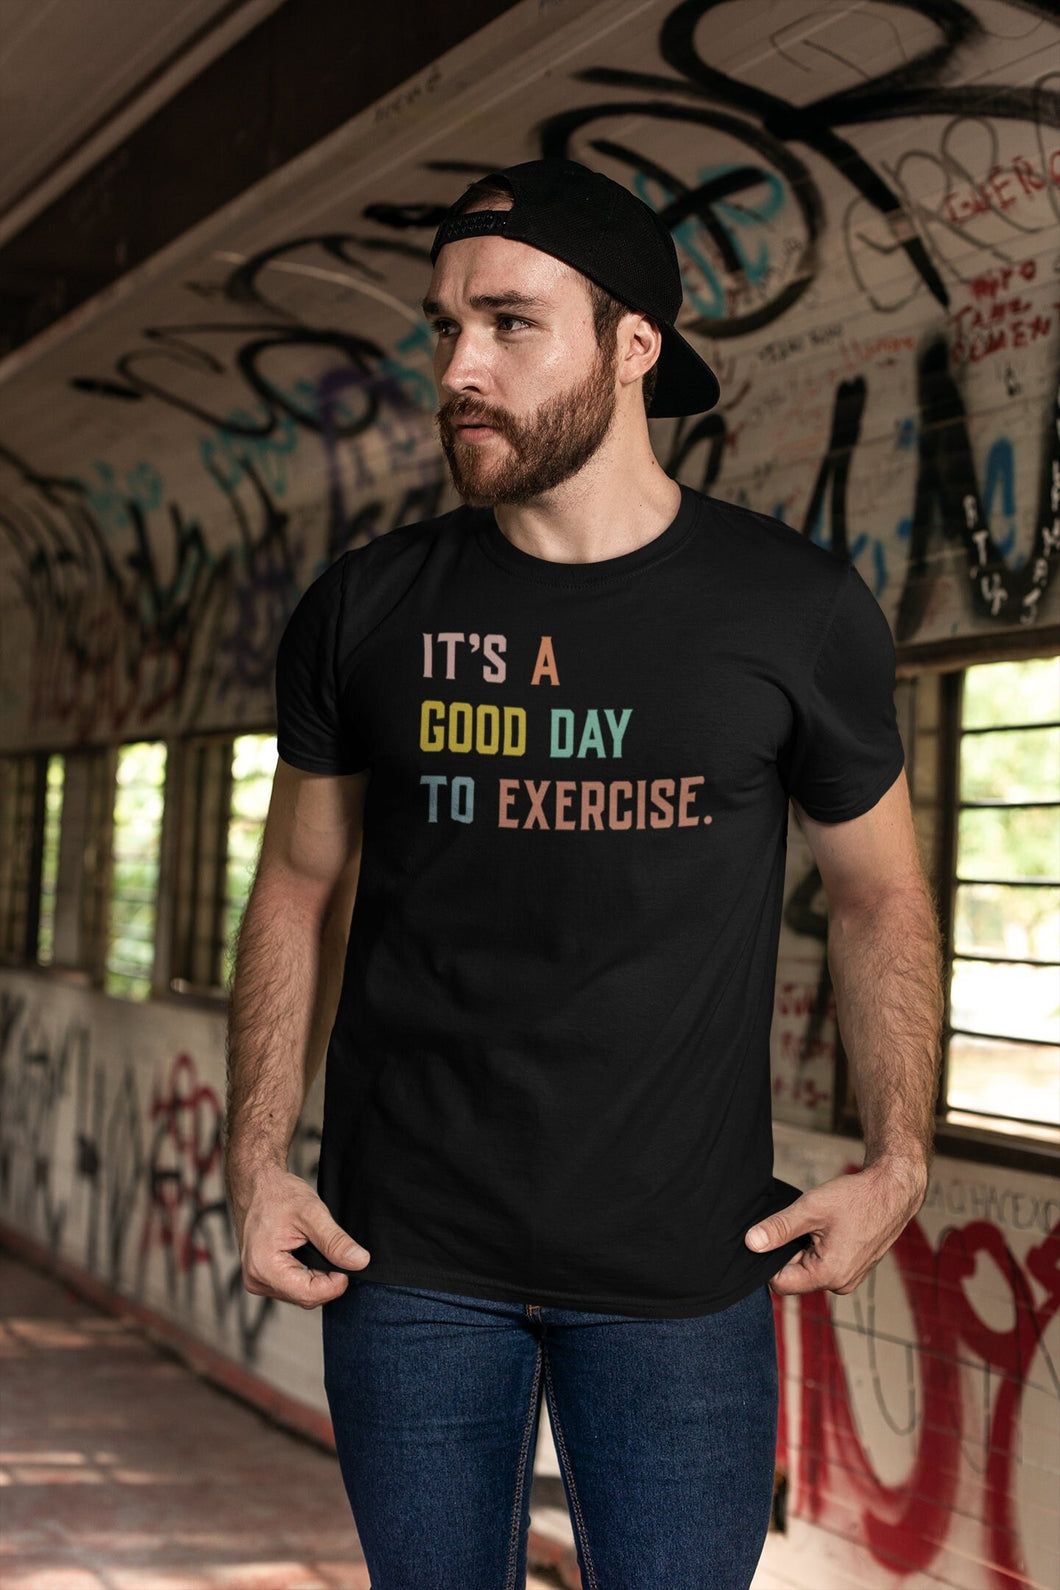 It's A Good Day To Exercise Shirt, Workout Shirt, Gym Lover Shirt, Exercise Shirt, Gym Teacher